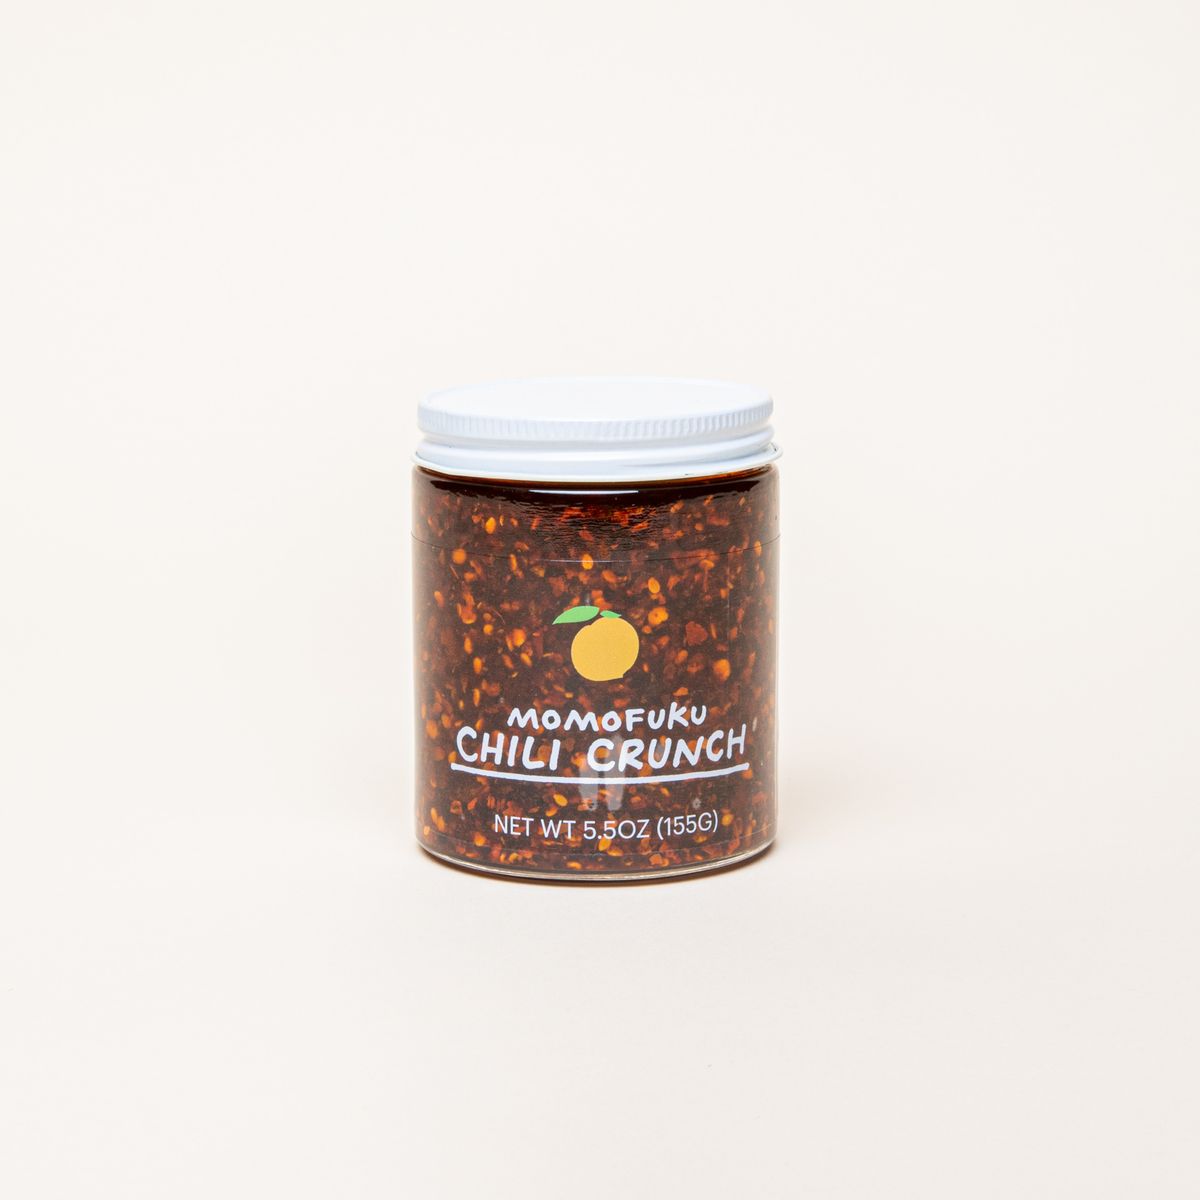 A clear jar with a white cap filled with a warm brown sauce with chili flakes- the jar has a label that reads, "Momofuku Chili Crunch"